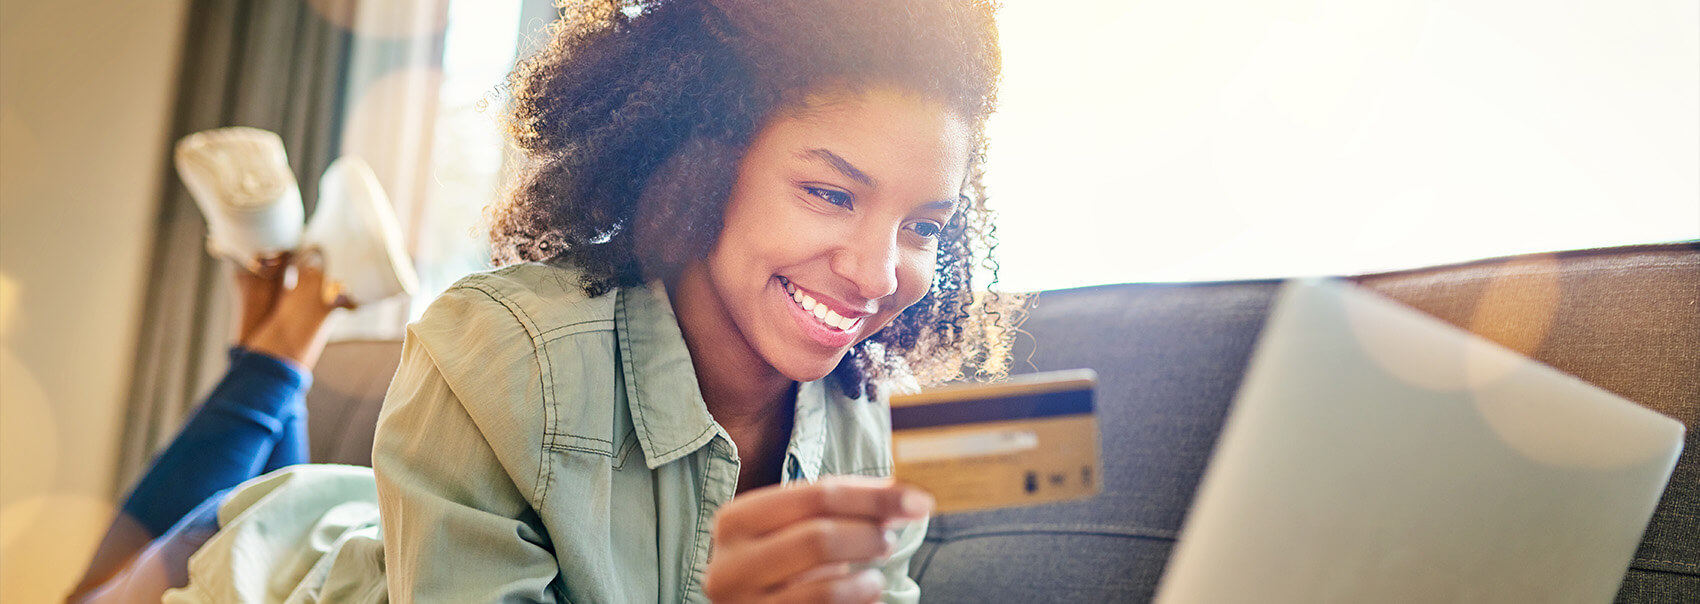 young adult woman laying on stomach on couch with her laptop, holding a credit card in one hand